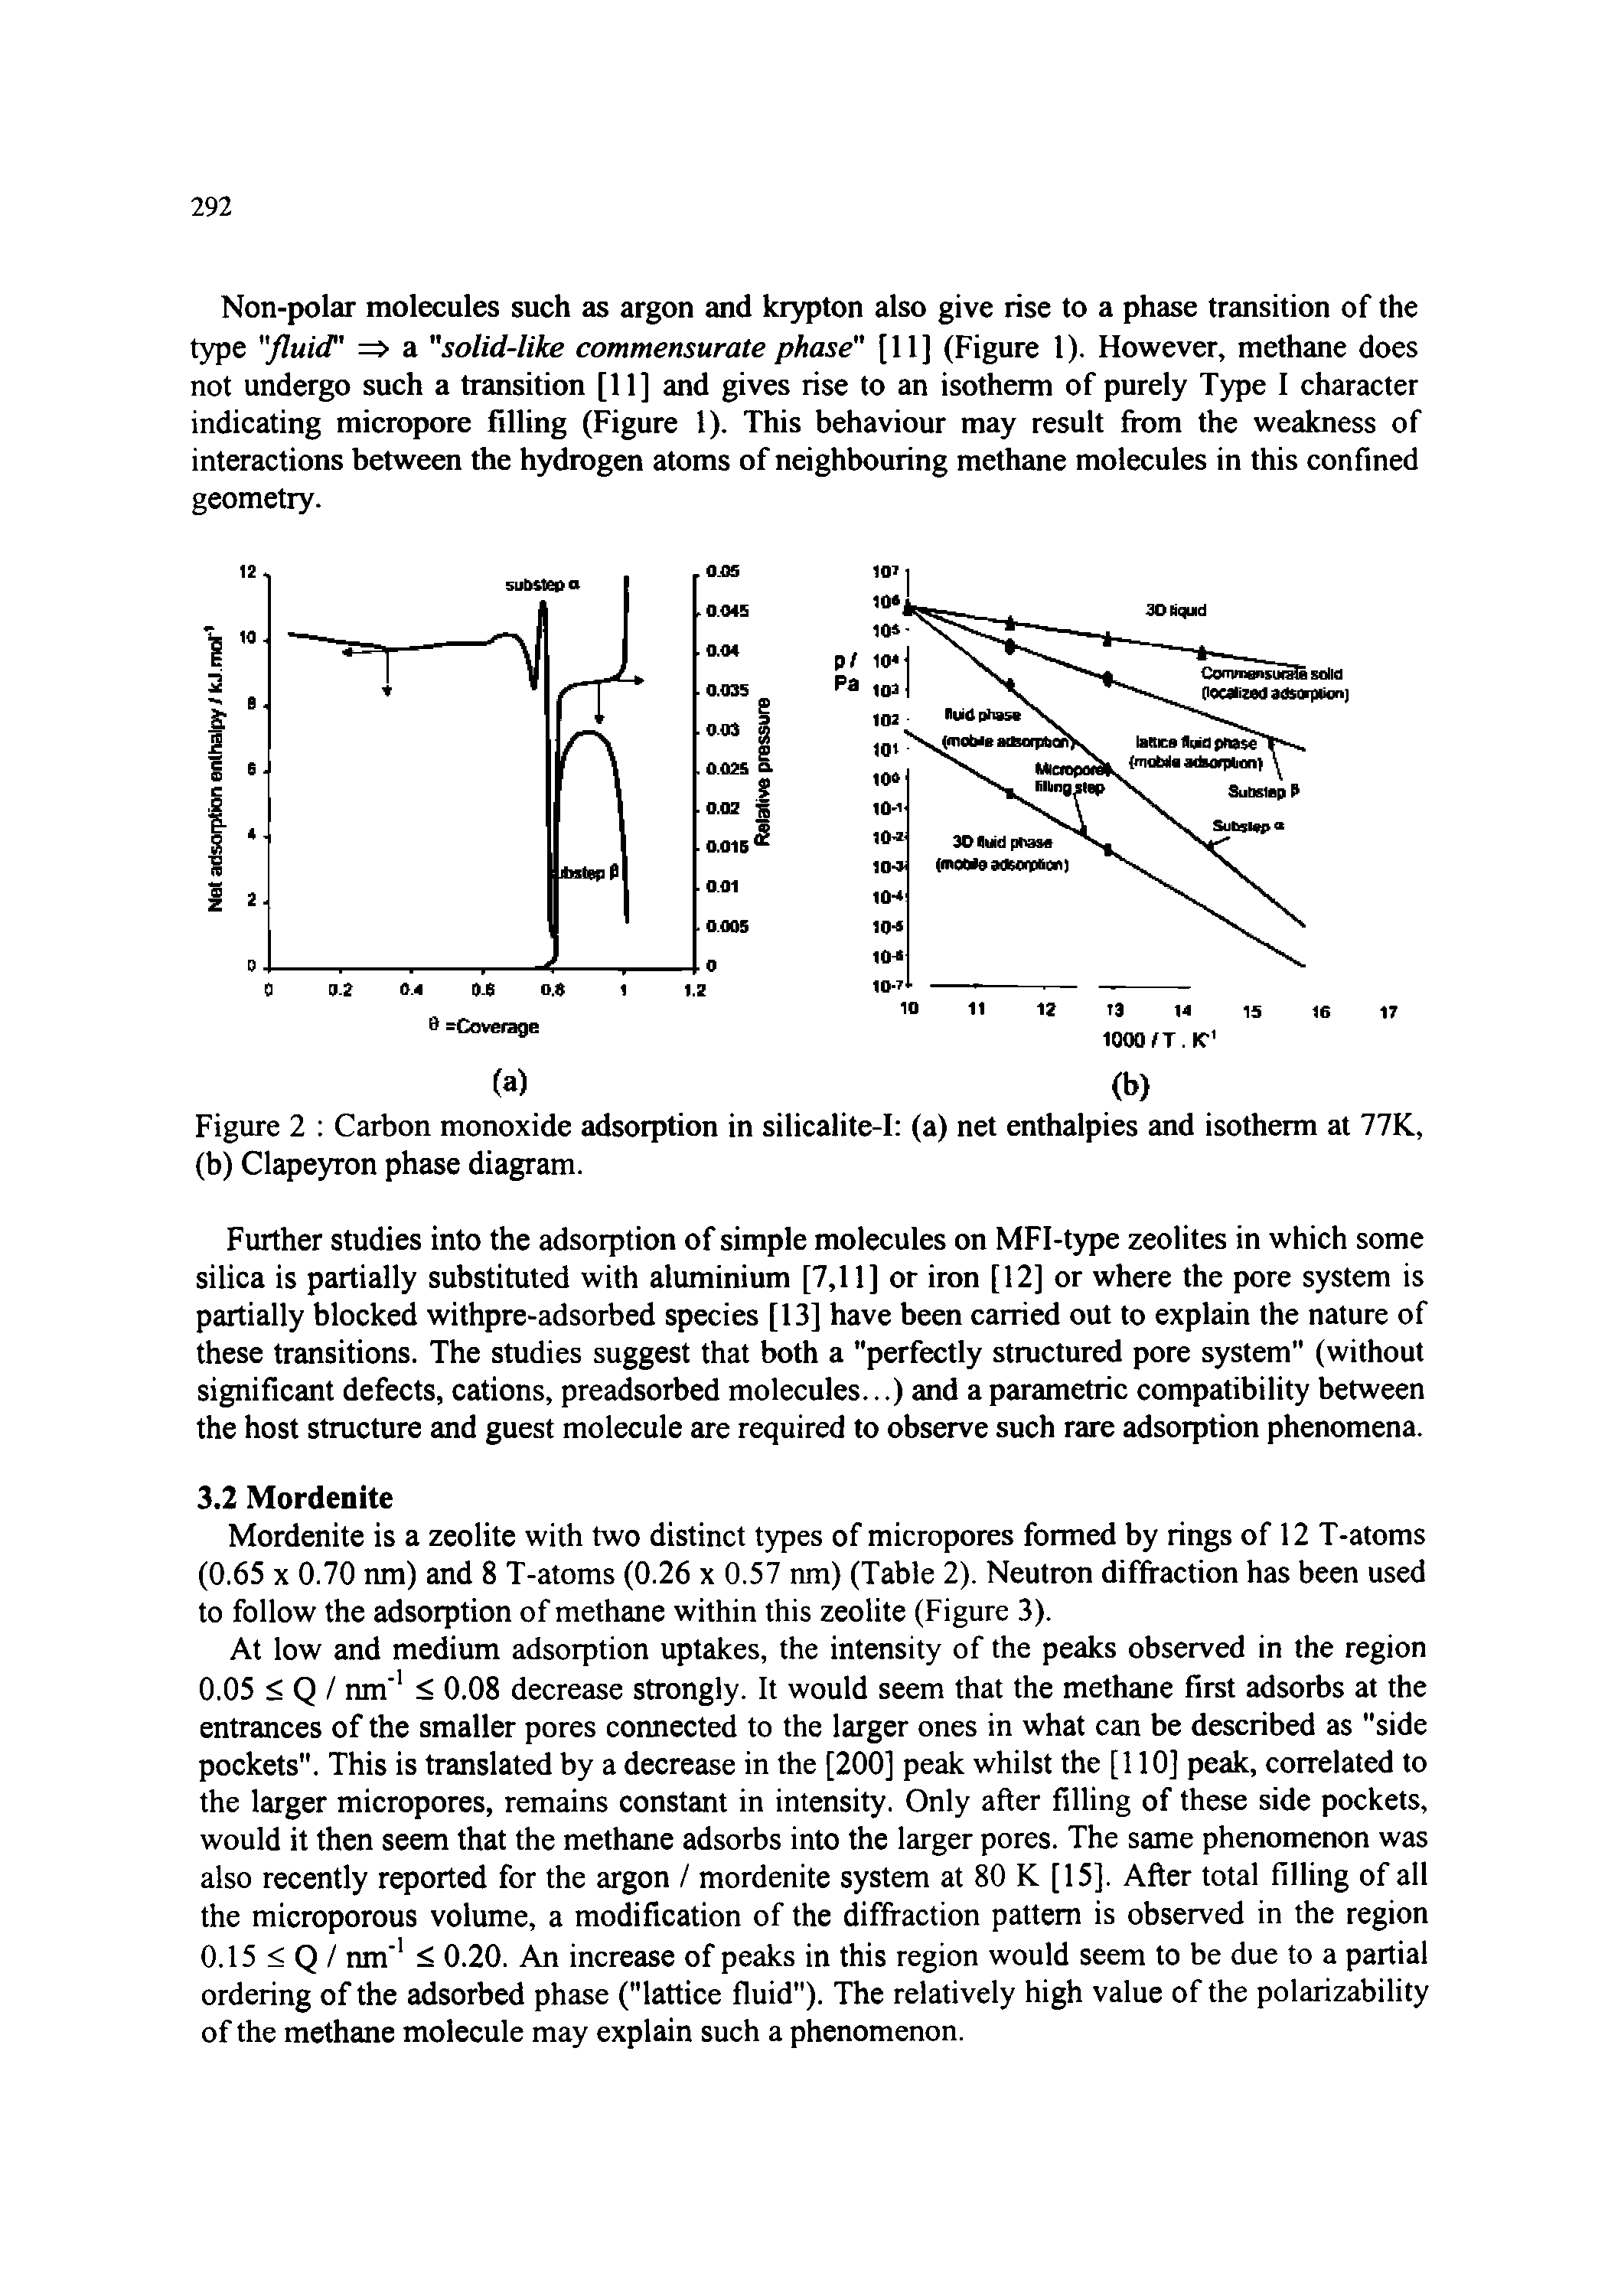 Figure 2 Carbon monoxide adsorption in silicalite-I (a) net enthalpies and isotherm at 77K, (b) Clapeyron phase diagram.